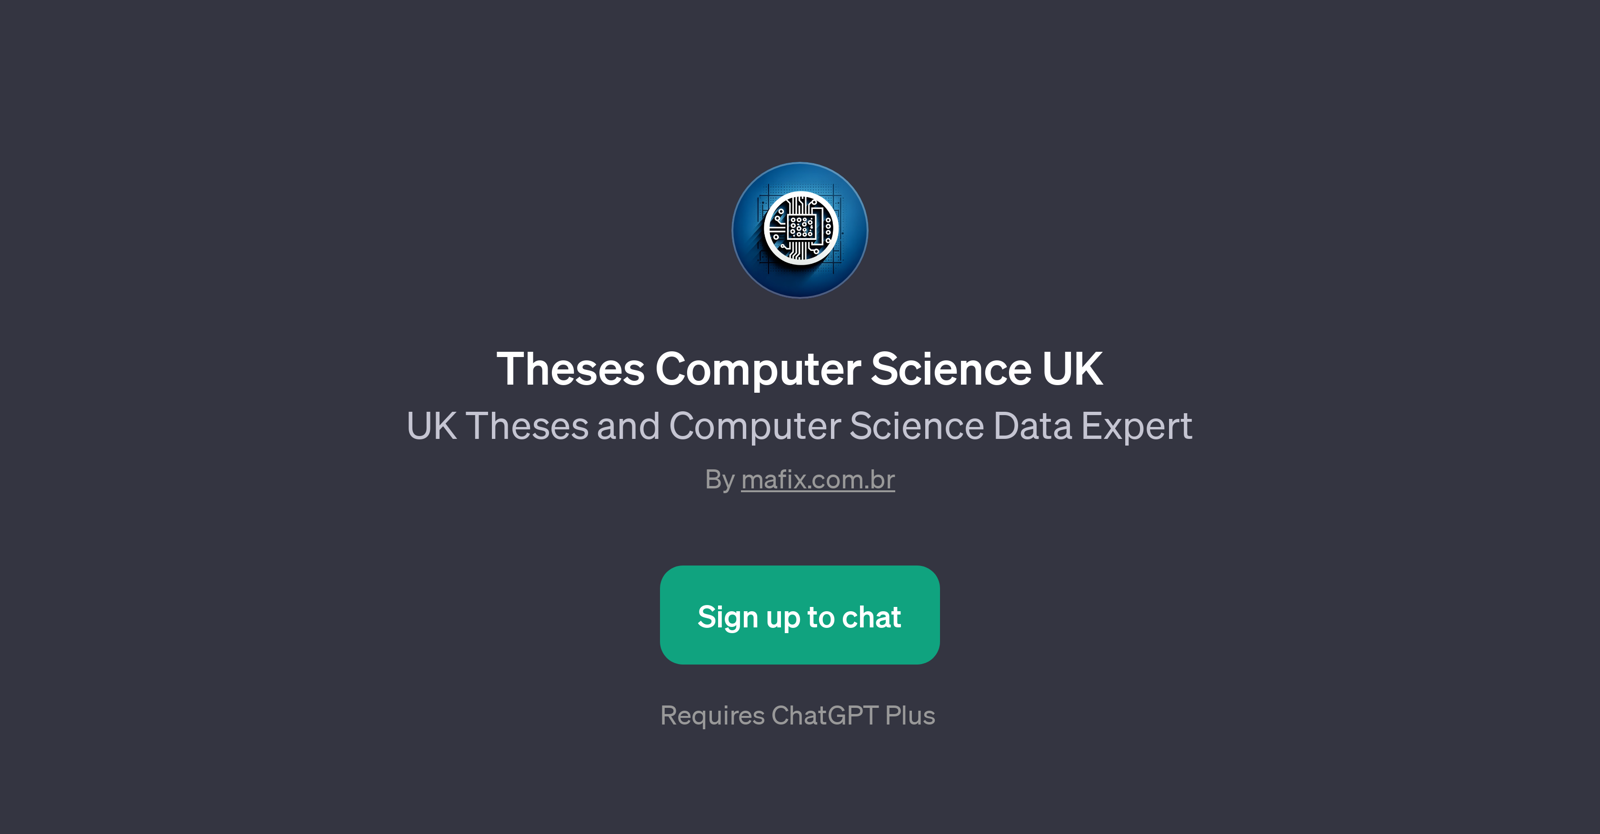 Theses Computer Science UK website